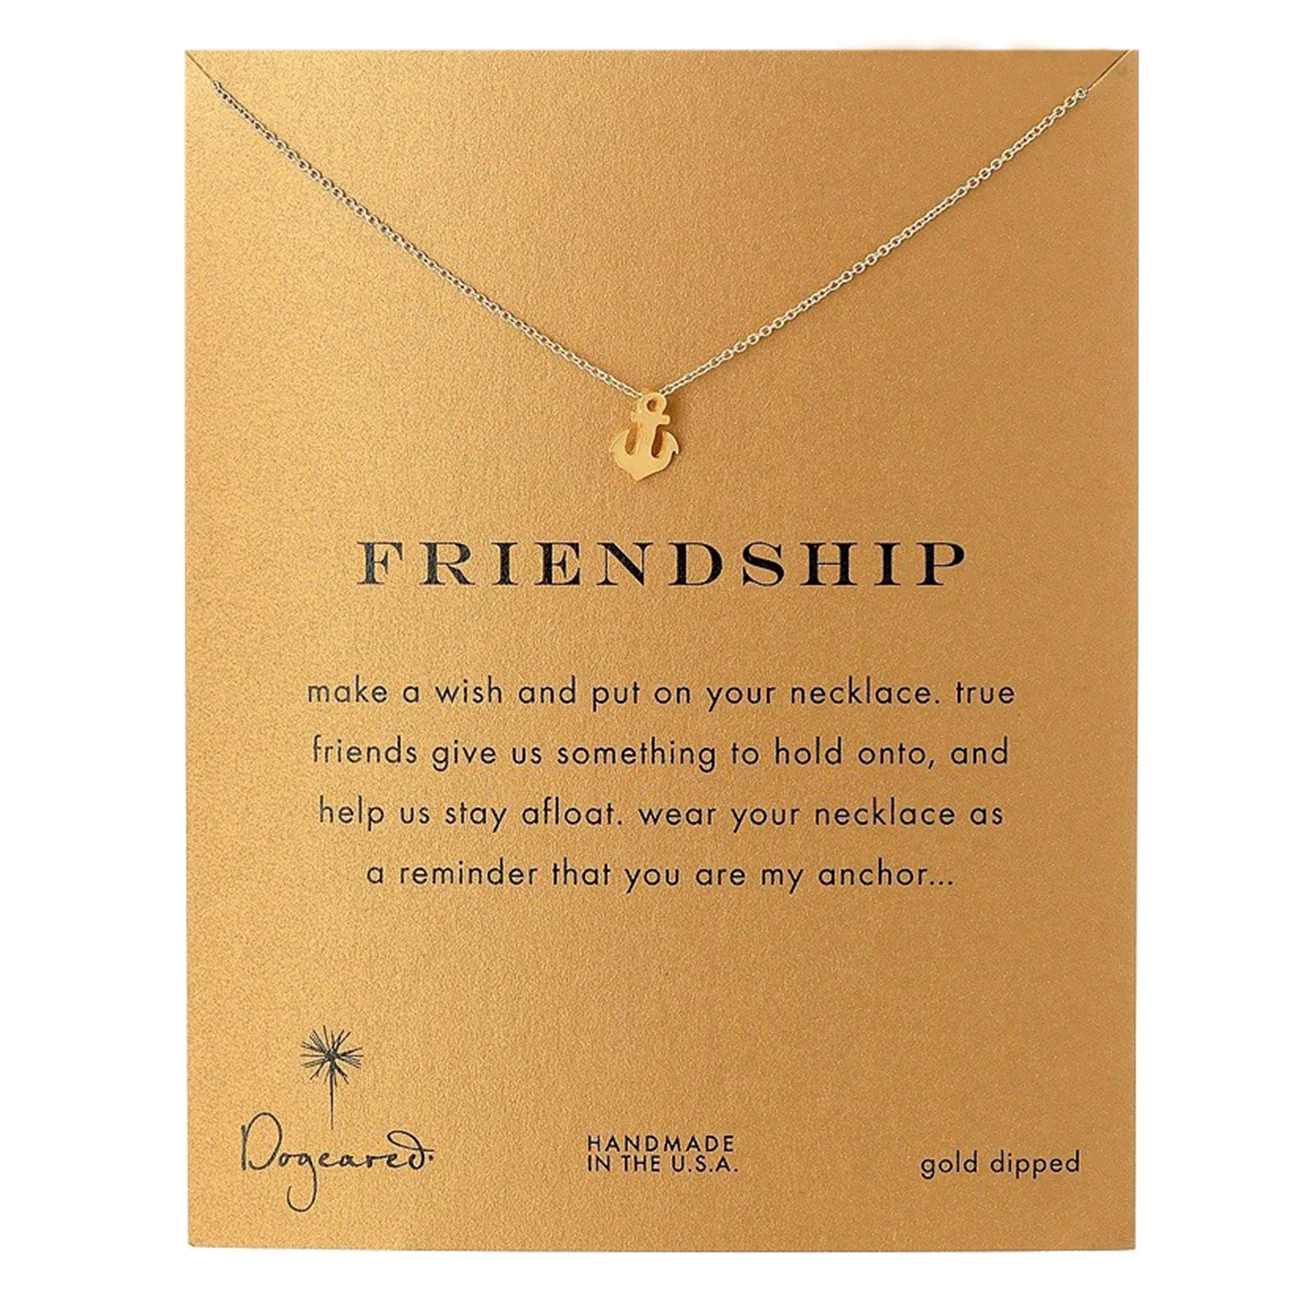 

Friendship Anchor Compass Necklace Good Luck Elephant Pendant Chain Necklace with Message Card Gift Card, As the pictures